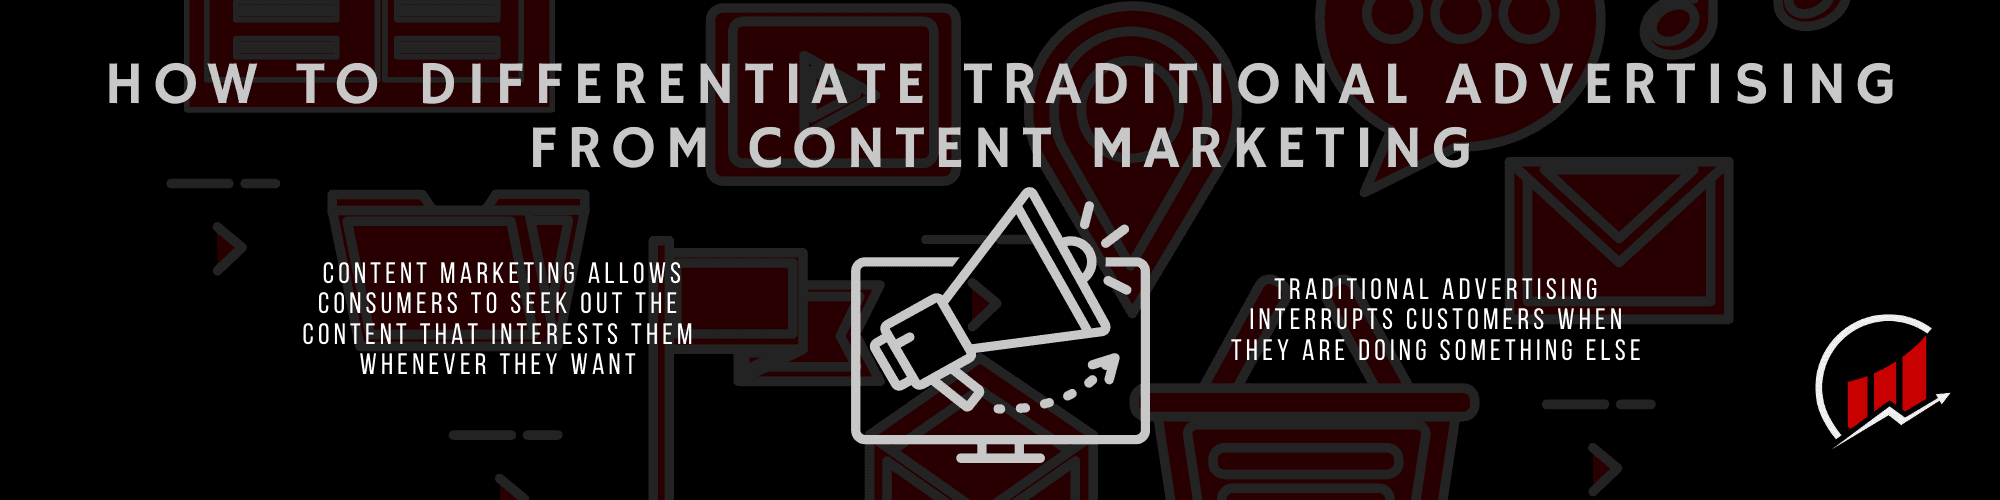 Content Marketing and Traditional Advertising What's the Difference